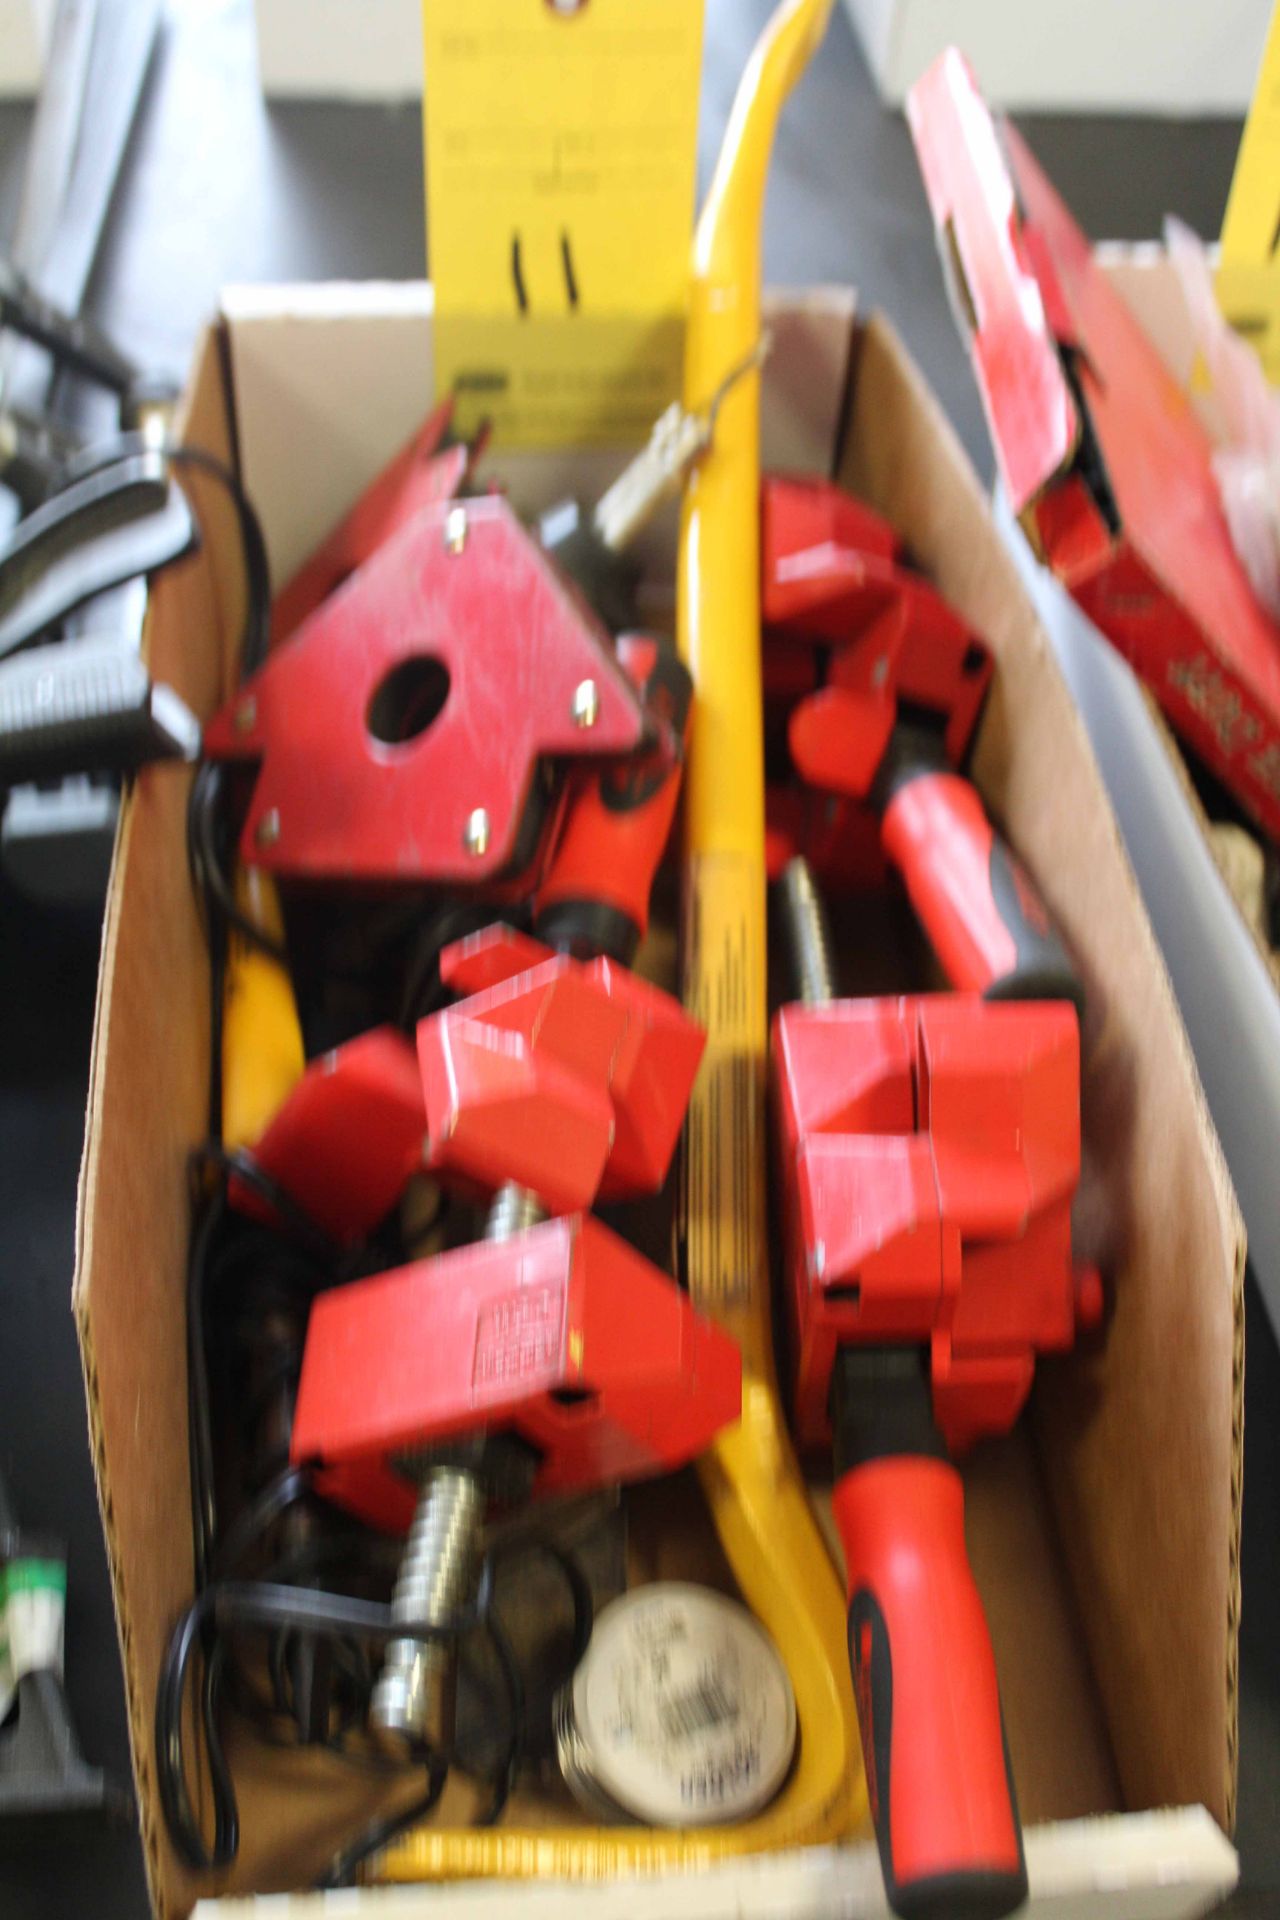 LOT CONSISTING OF: welders, magnets, prybars & clamps (in one box)